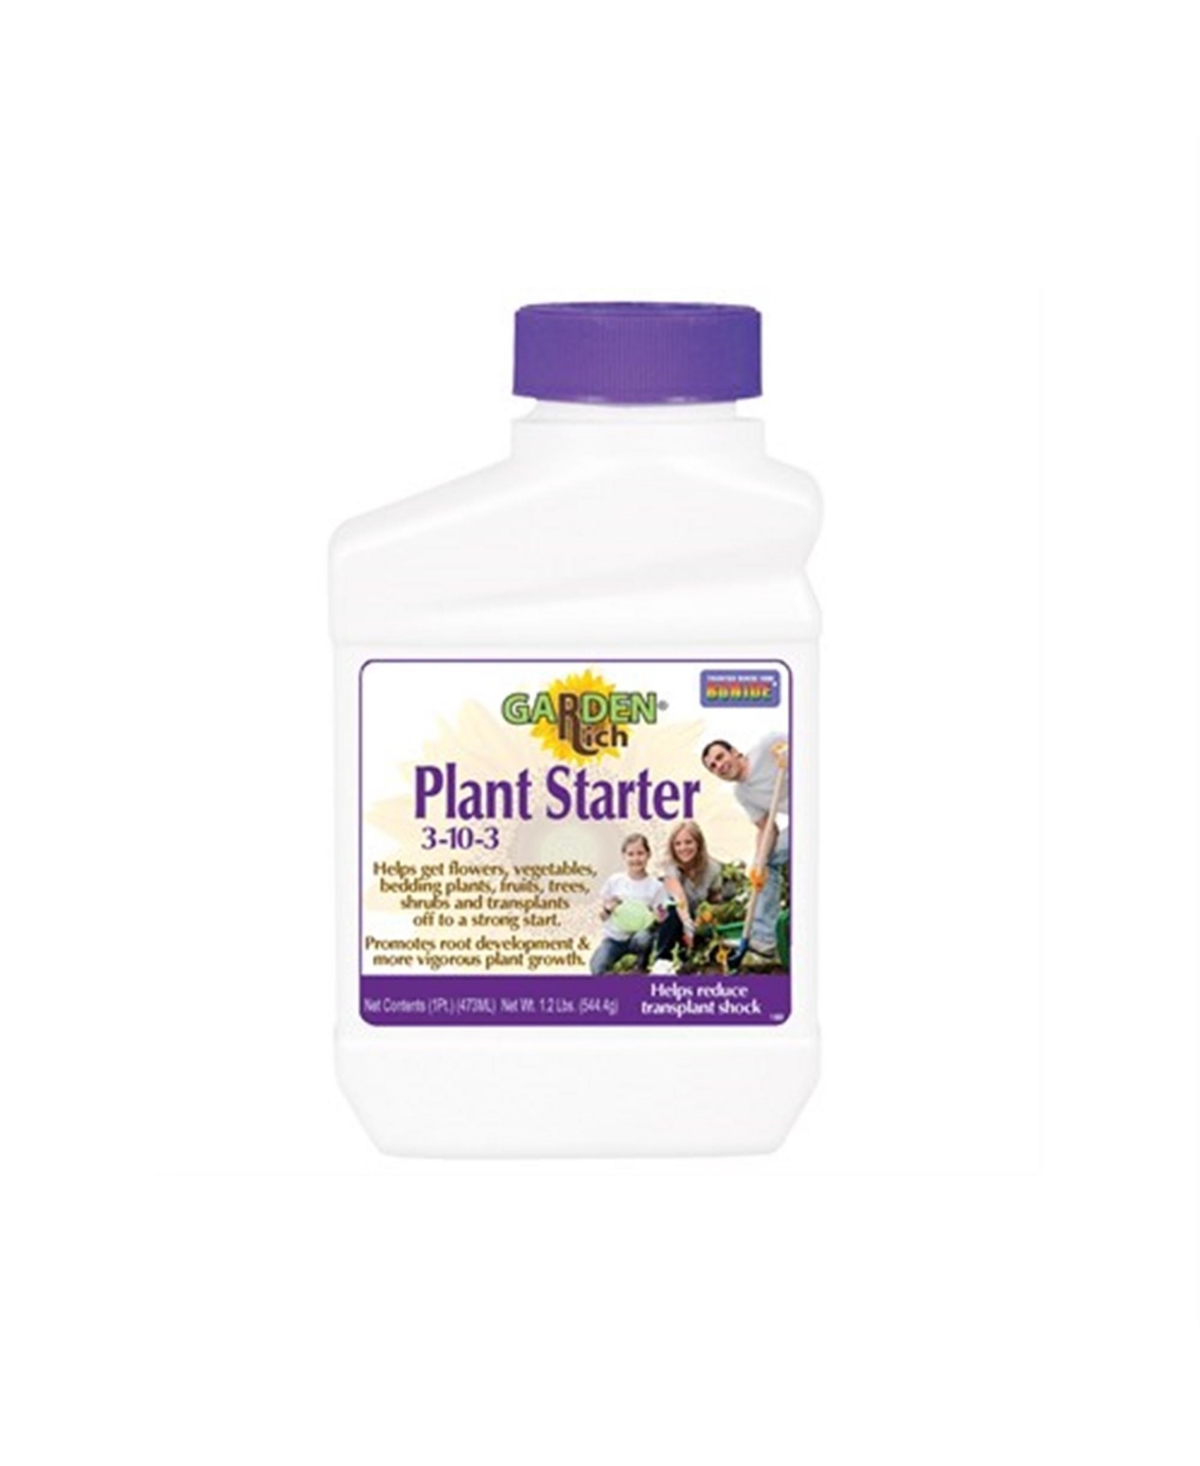 Garden Rich Plant Starter 3-10-3 Concentrate Solution 1 pint - White